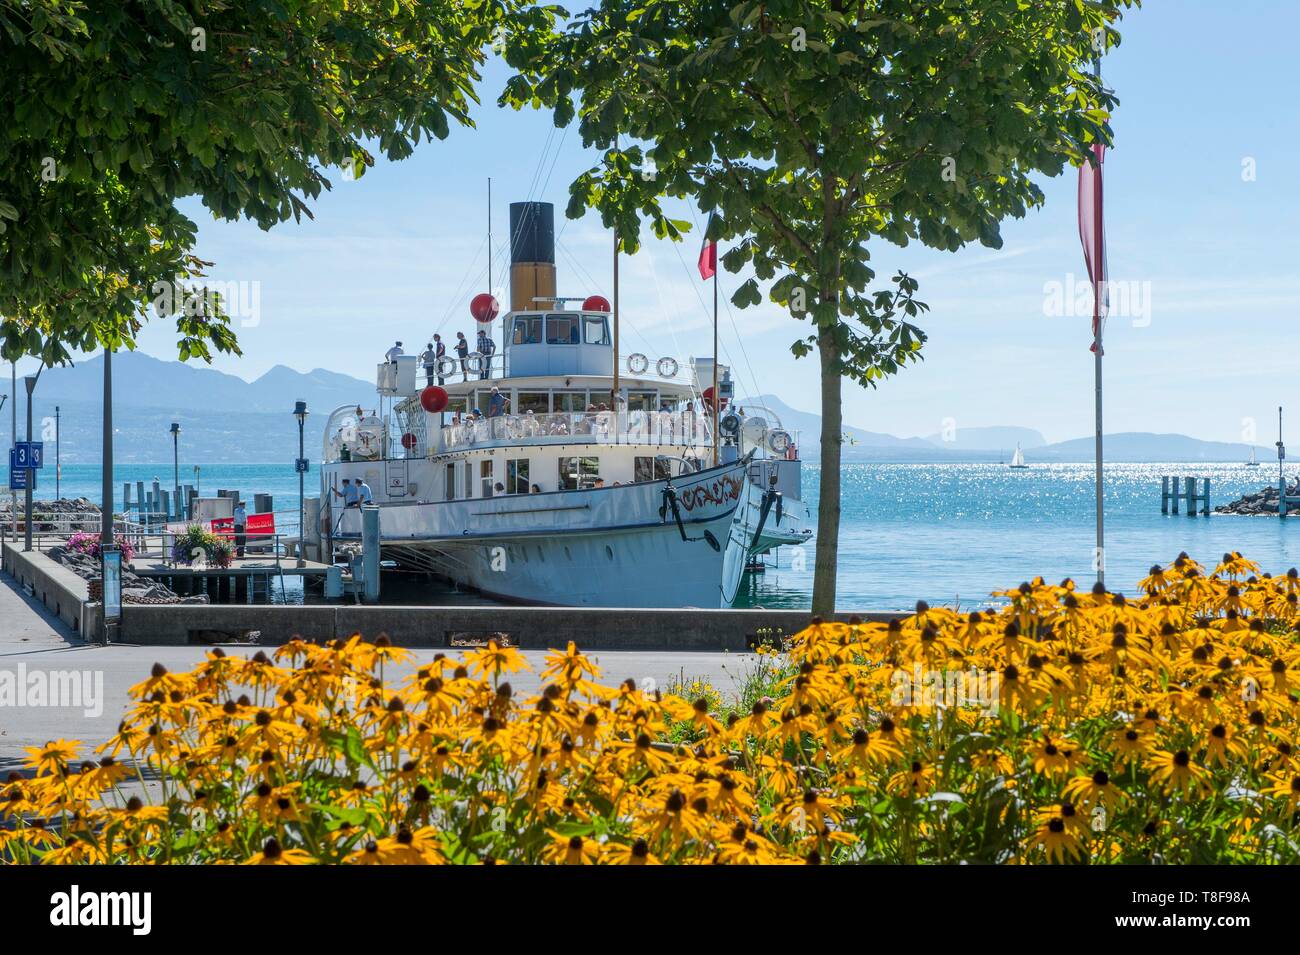 Switzerland, Canton of Vaud, Lausanne, Olympic city seat of the IOC the paddle steamer, the Simplon, on the pier Jean pascal Delamurazer Stock Photo